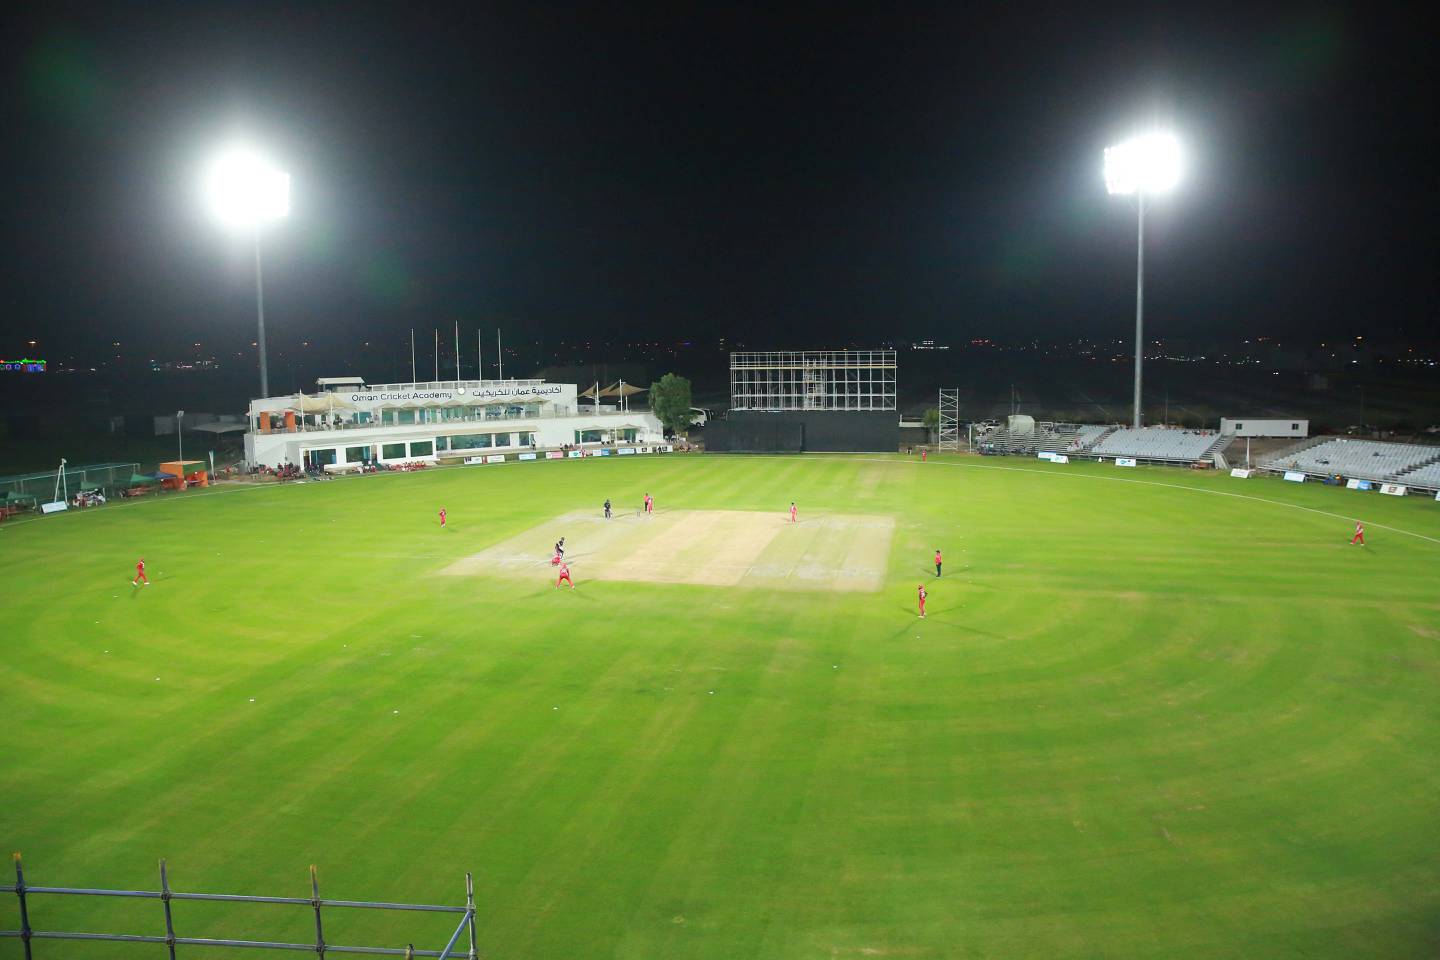 New broadcast-standard floodlights have been added to the Oman Cricket Academy ground in Al Amerat, ahead of the arrival of the T20 World Cup. Photo: Oman Cricket